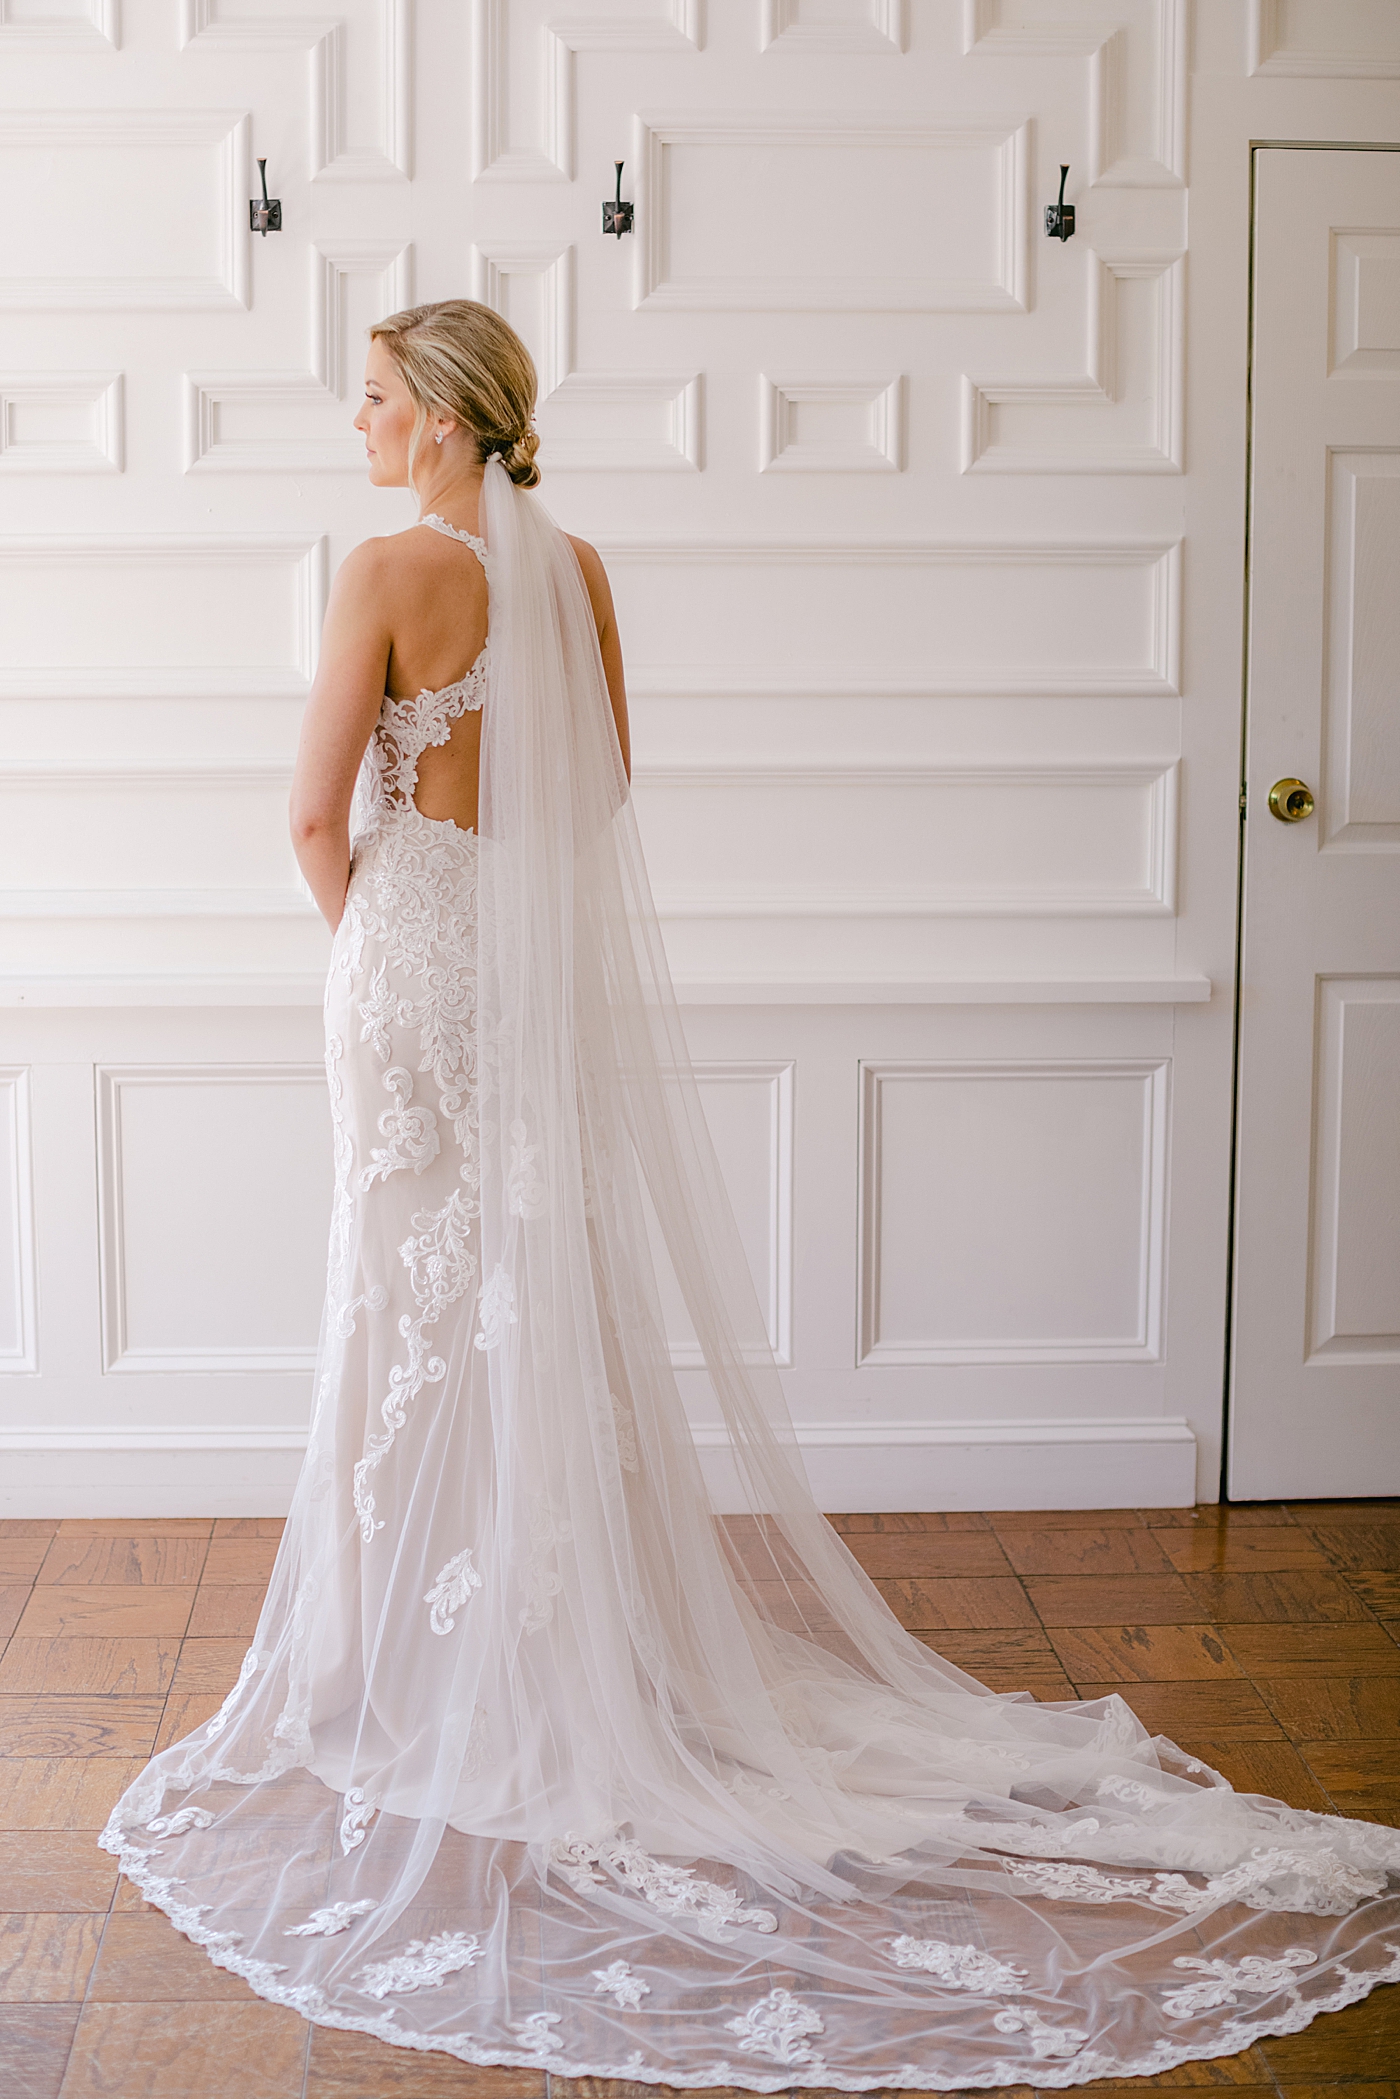 Bride looking out a window | Image by Hope Helmuth Photography